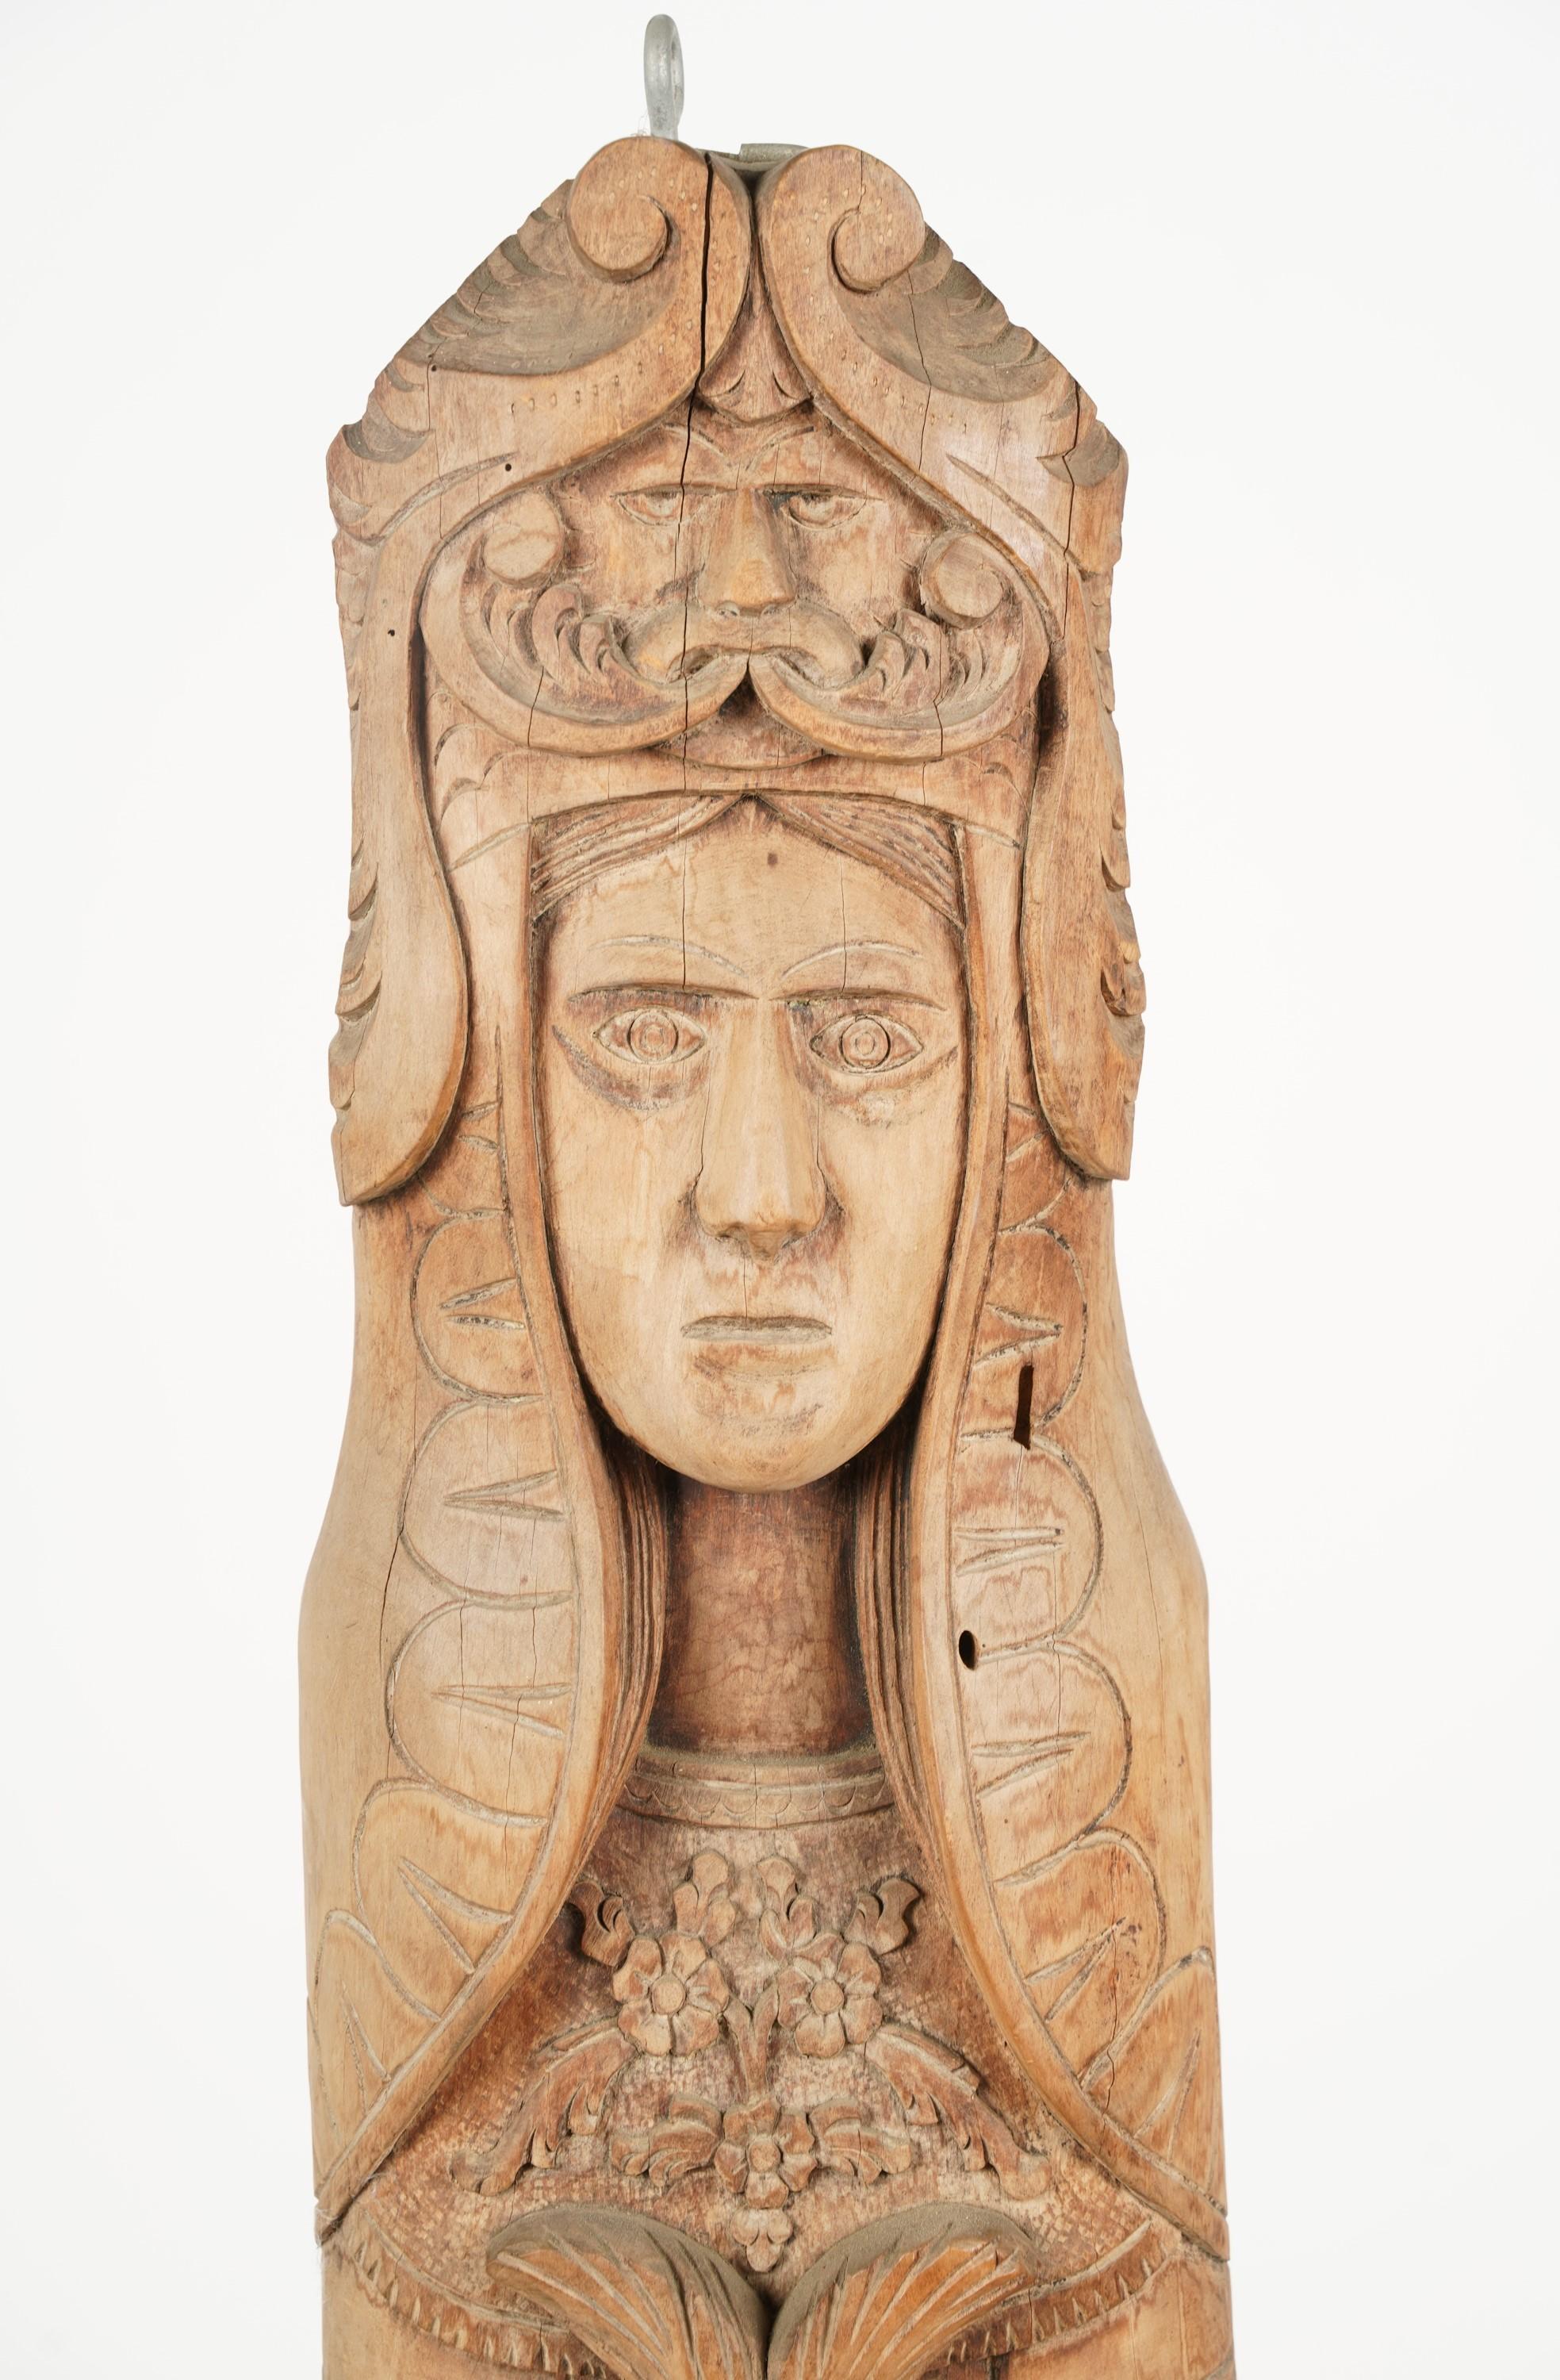 A large, heavy, intricately carved, rather engaging wood folk art pagan totem figure of a woman carrying a three-headed fish with the God of Wind (North wind or perhaps an Anemoi) symbol above her head.  Her captivating yet stoic gaze and